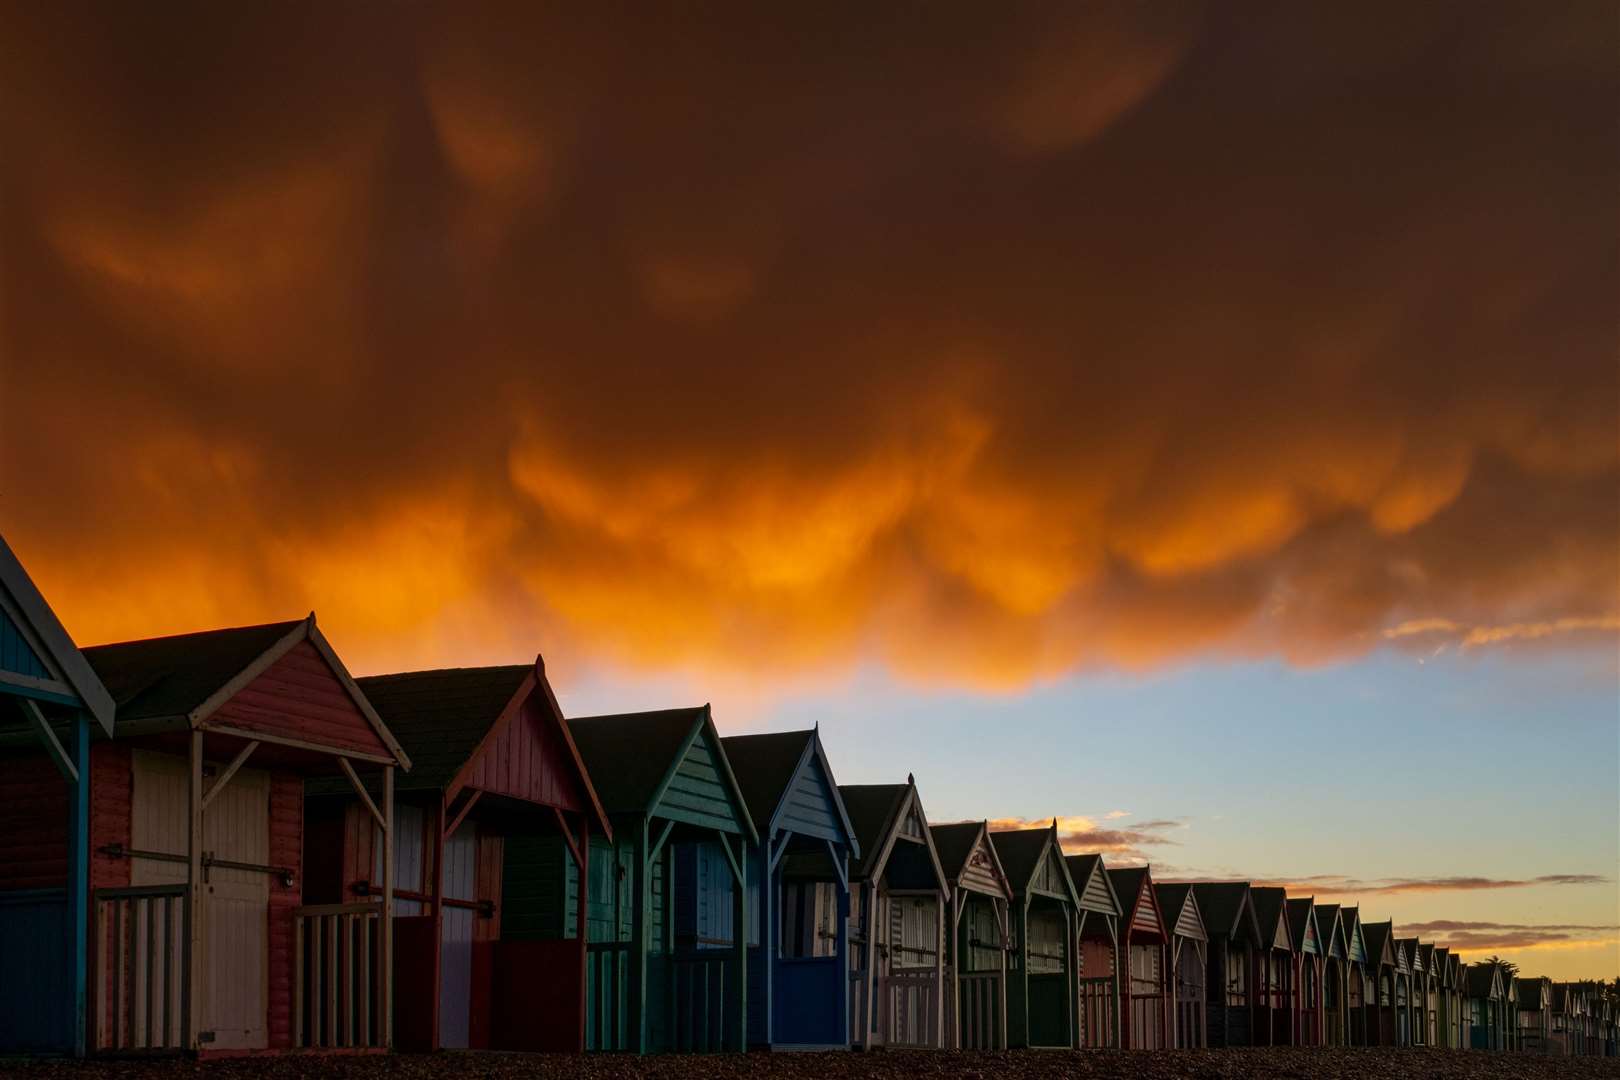 James McBean's winning photo of thunder clouds gathered over beach huts in Herne Bay